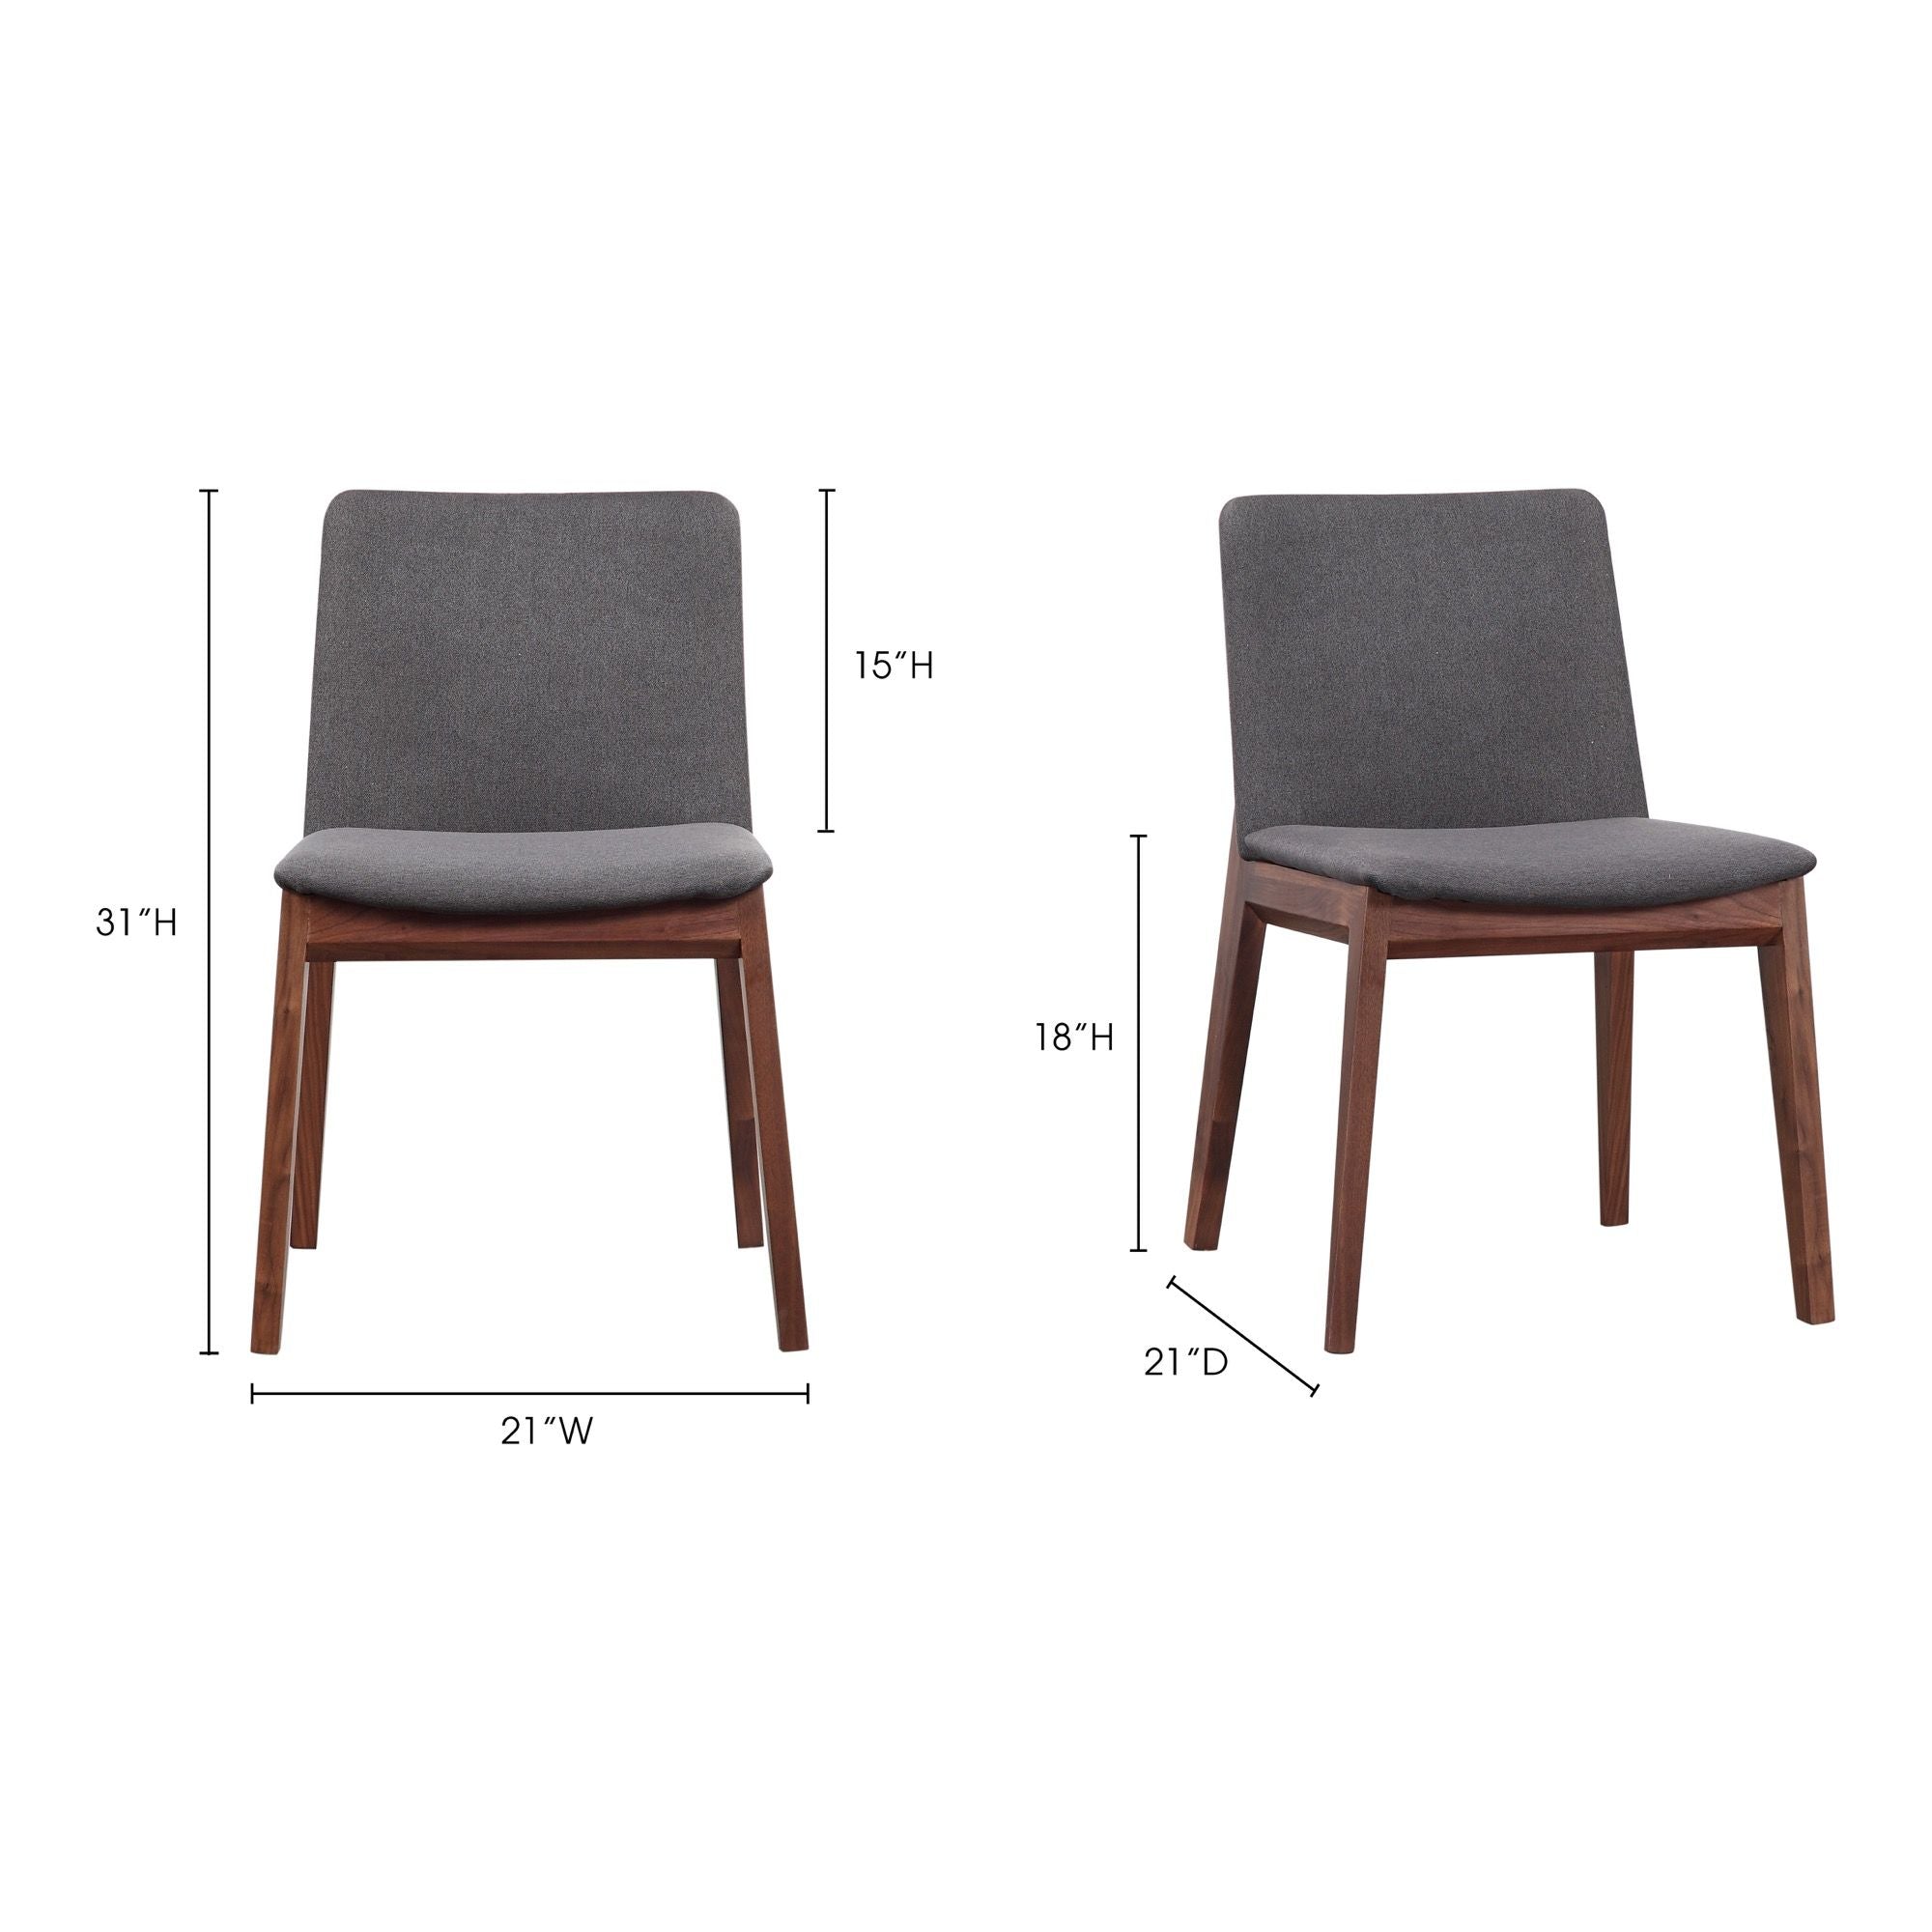 Deco - Dining Chair - Gray - M2